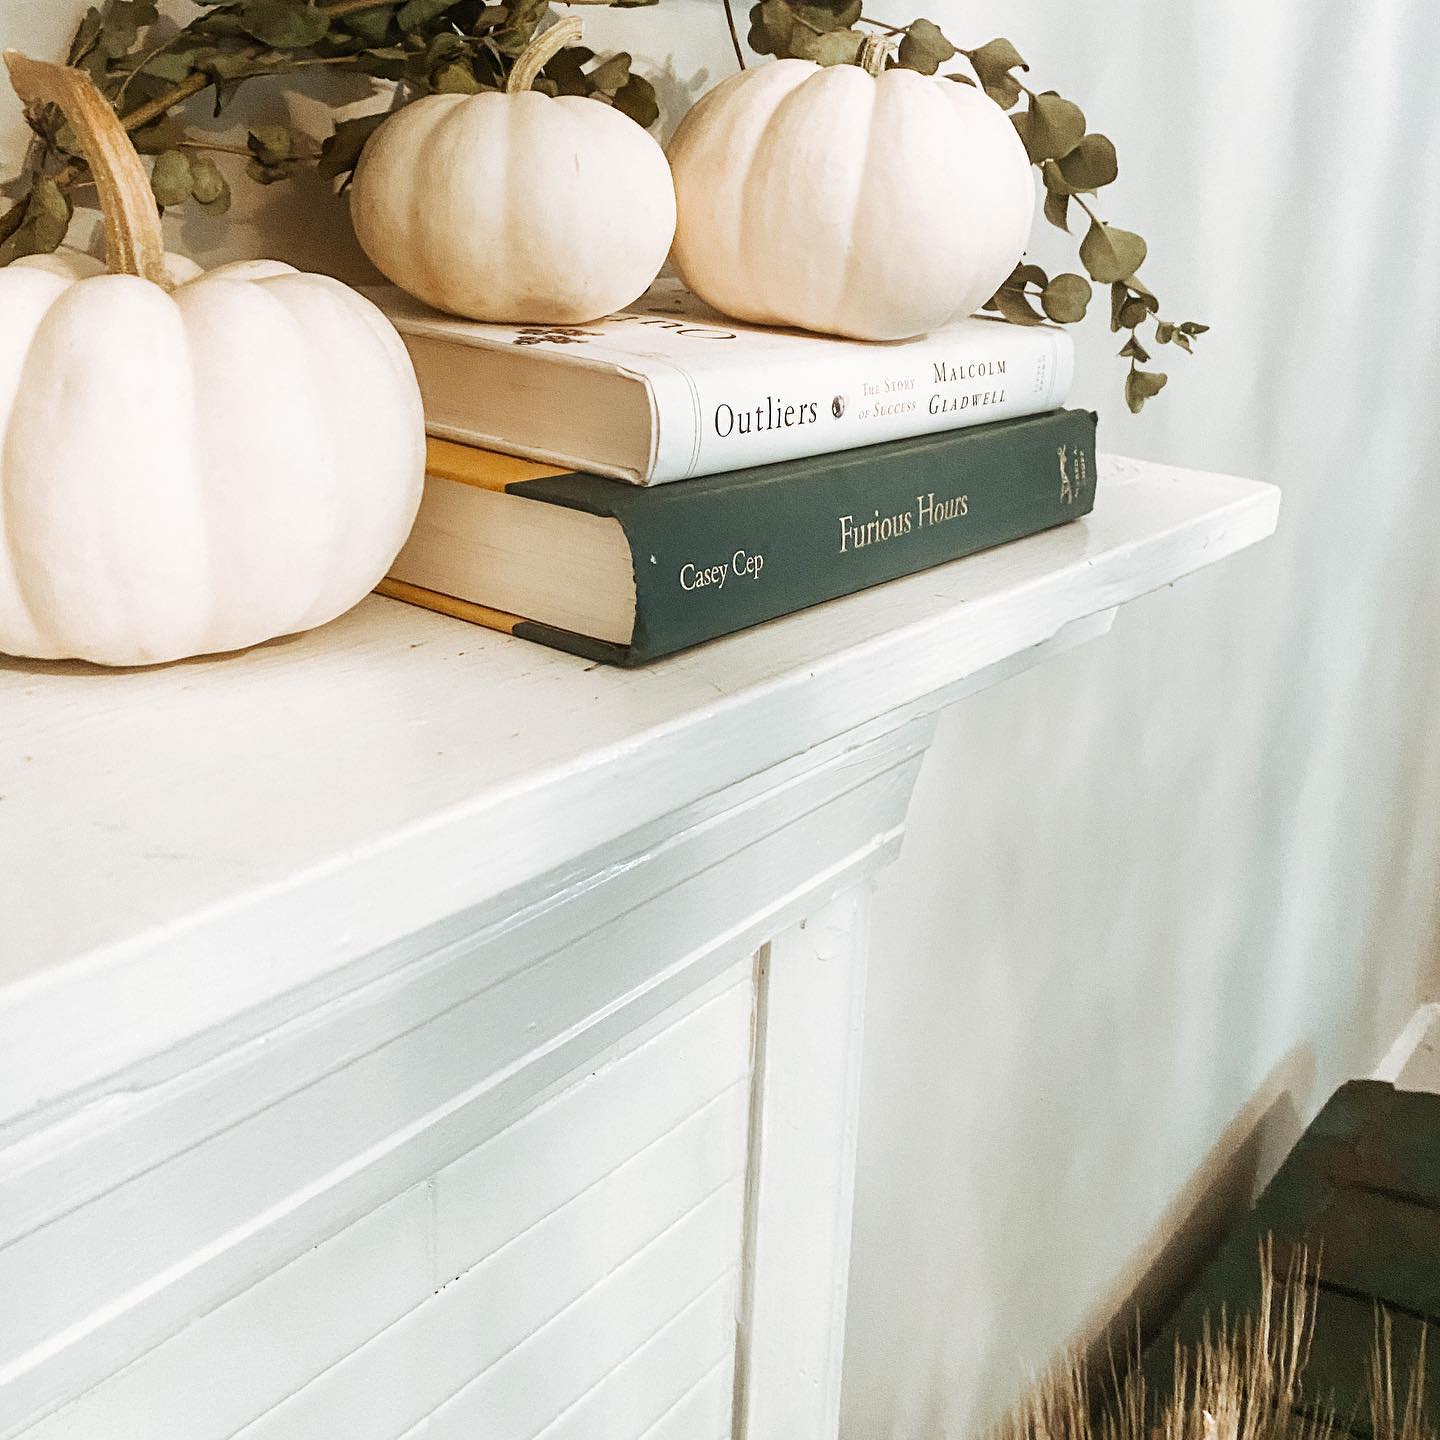 120560505 724233254838478 297854902281221527 o 3 tips from local interior designer Lauren Murphy to make your Thanksgiving celebration festive + cozy